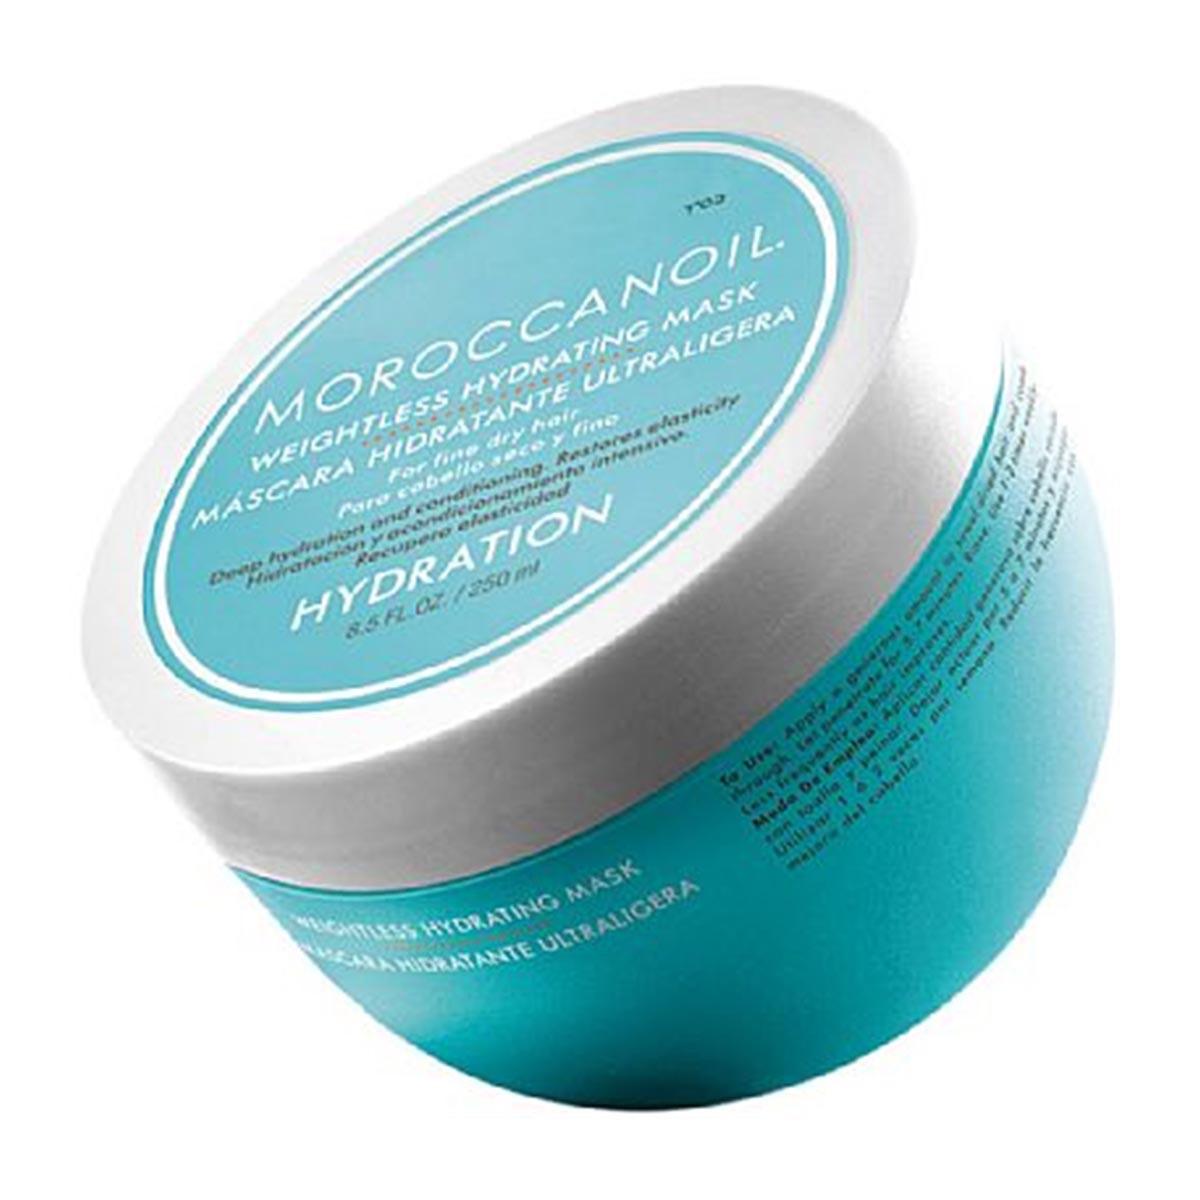 moroccanoil-hydration-weightless-hydrating-250ml-mask